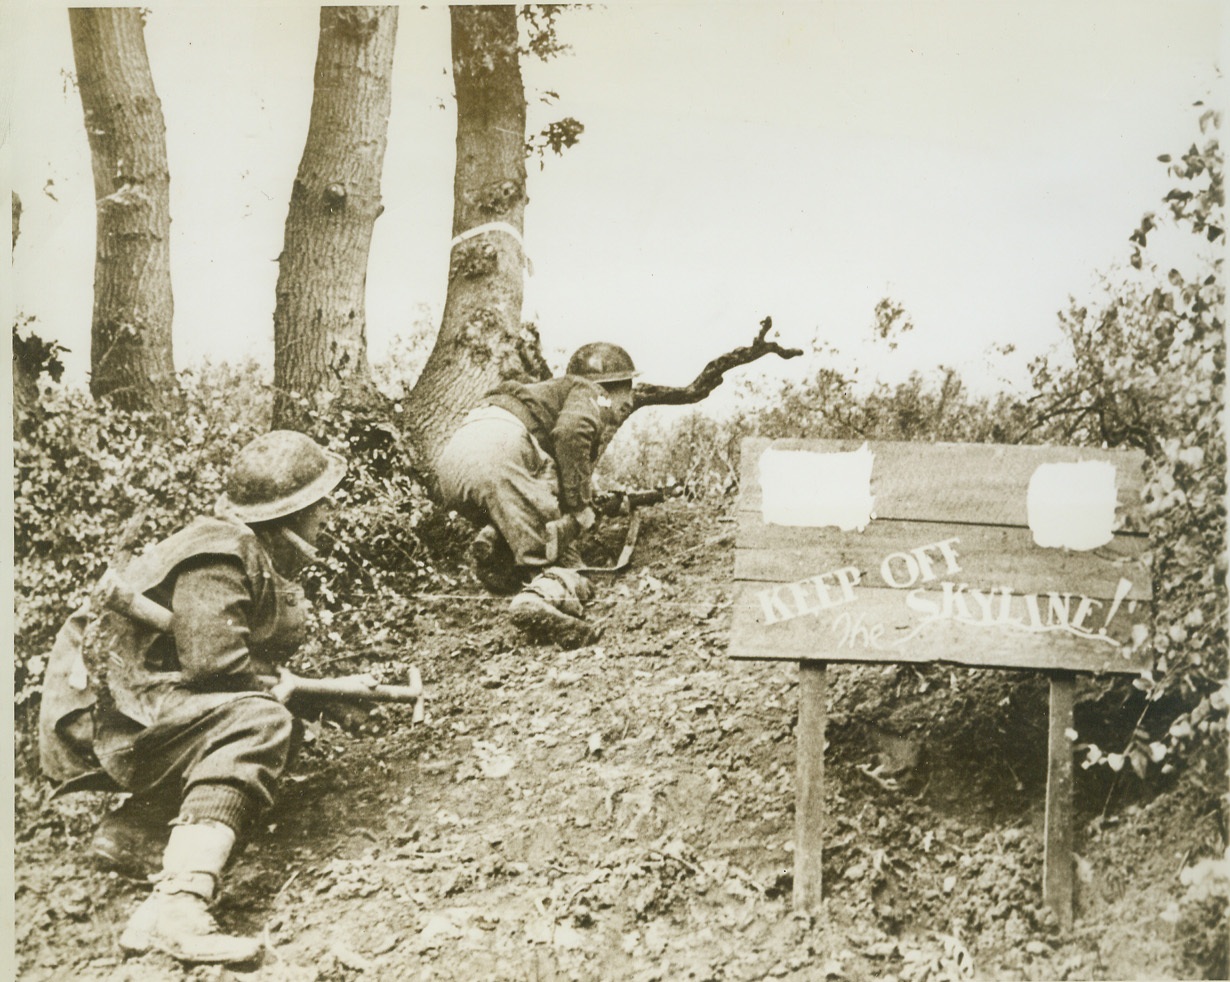 Don't Lose Your Head, 12/28/1943. ITALY -- If Allied soldiers forget to keep their heads about them mentally as they top this rise on the Sangro River firing line, they are apt to lose them physically. The "Keep off the Skyline" sign is religiously followed advice, and Gunner L.K. King, of London and Lance Bombardier T.R. Sleighholme, of Cumberland, two British 8th Army fighters, duck low to avoid Nazi shells. Credit: (ACME);